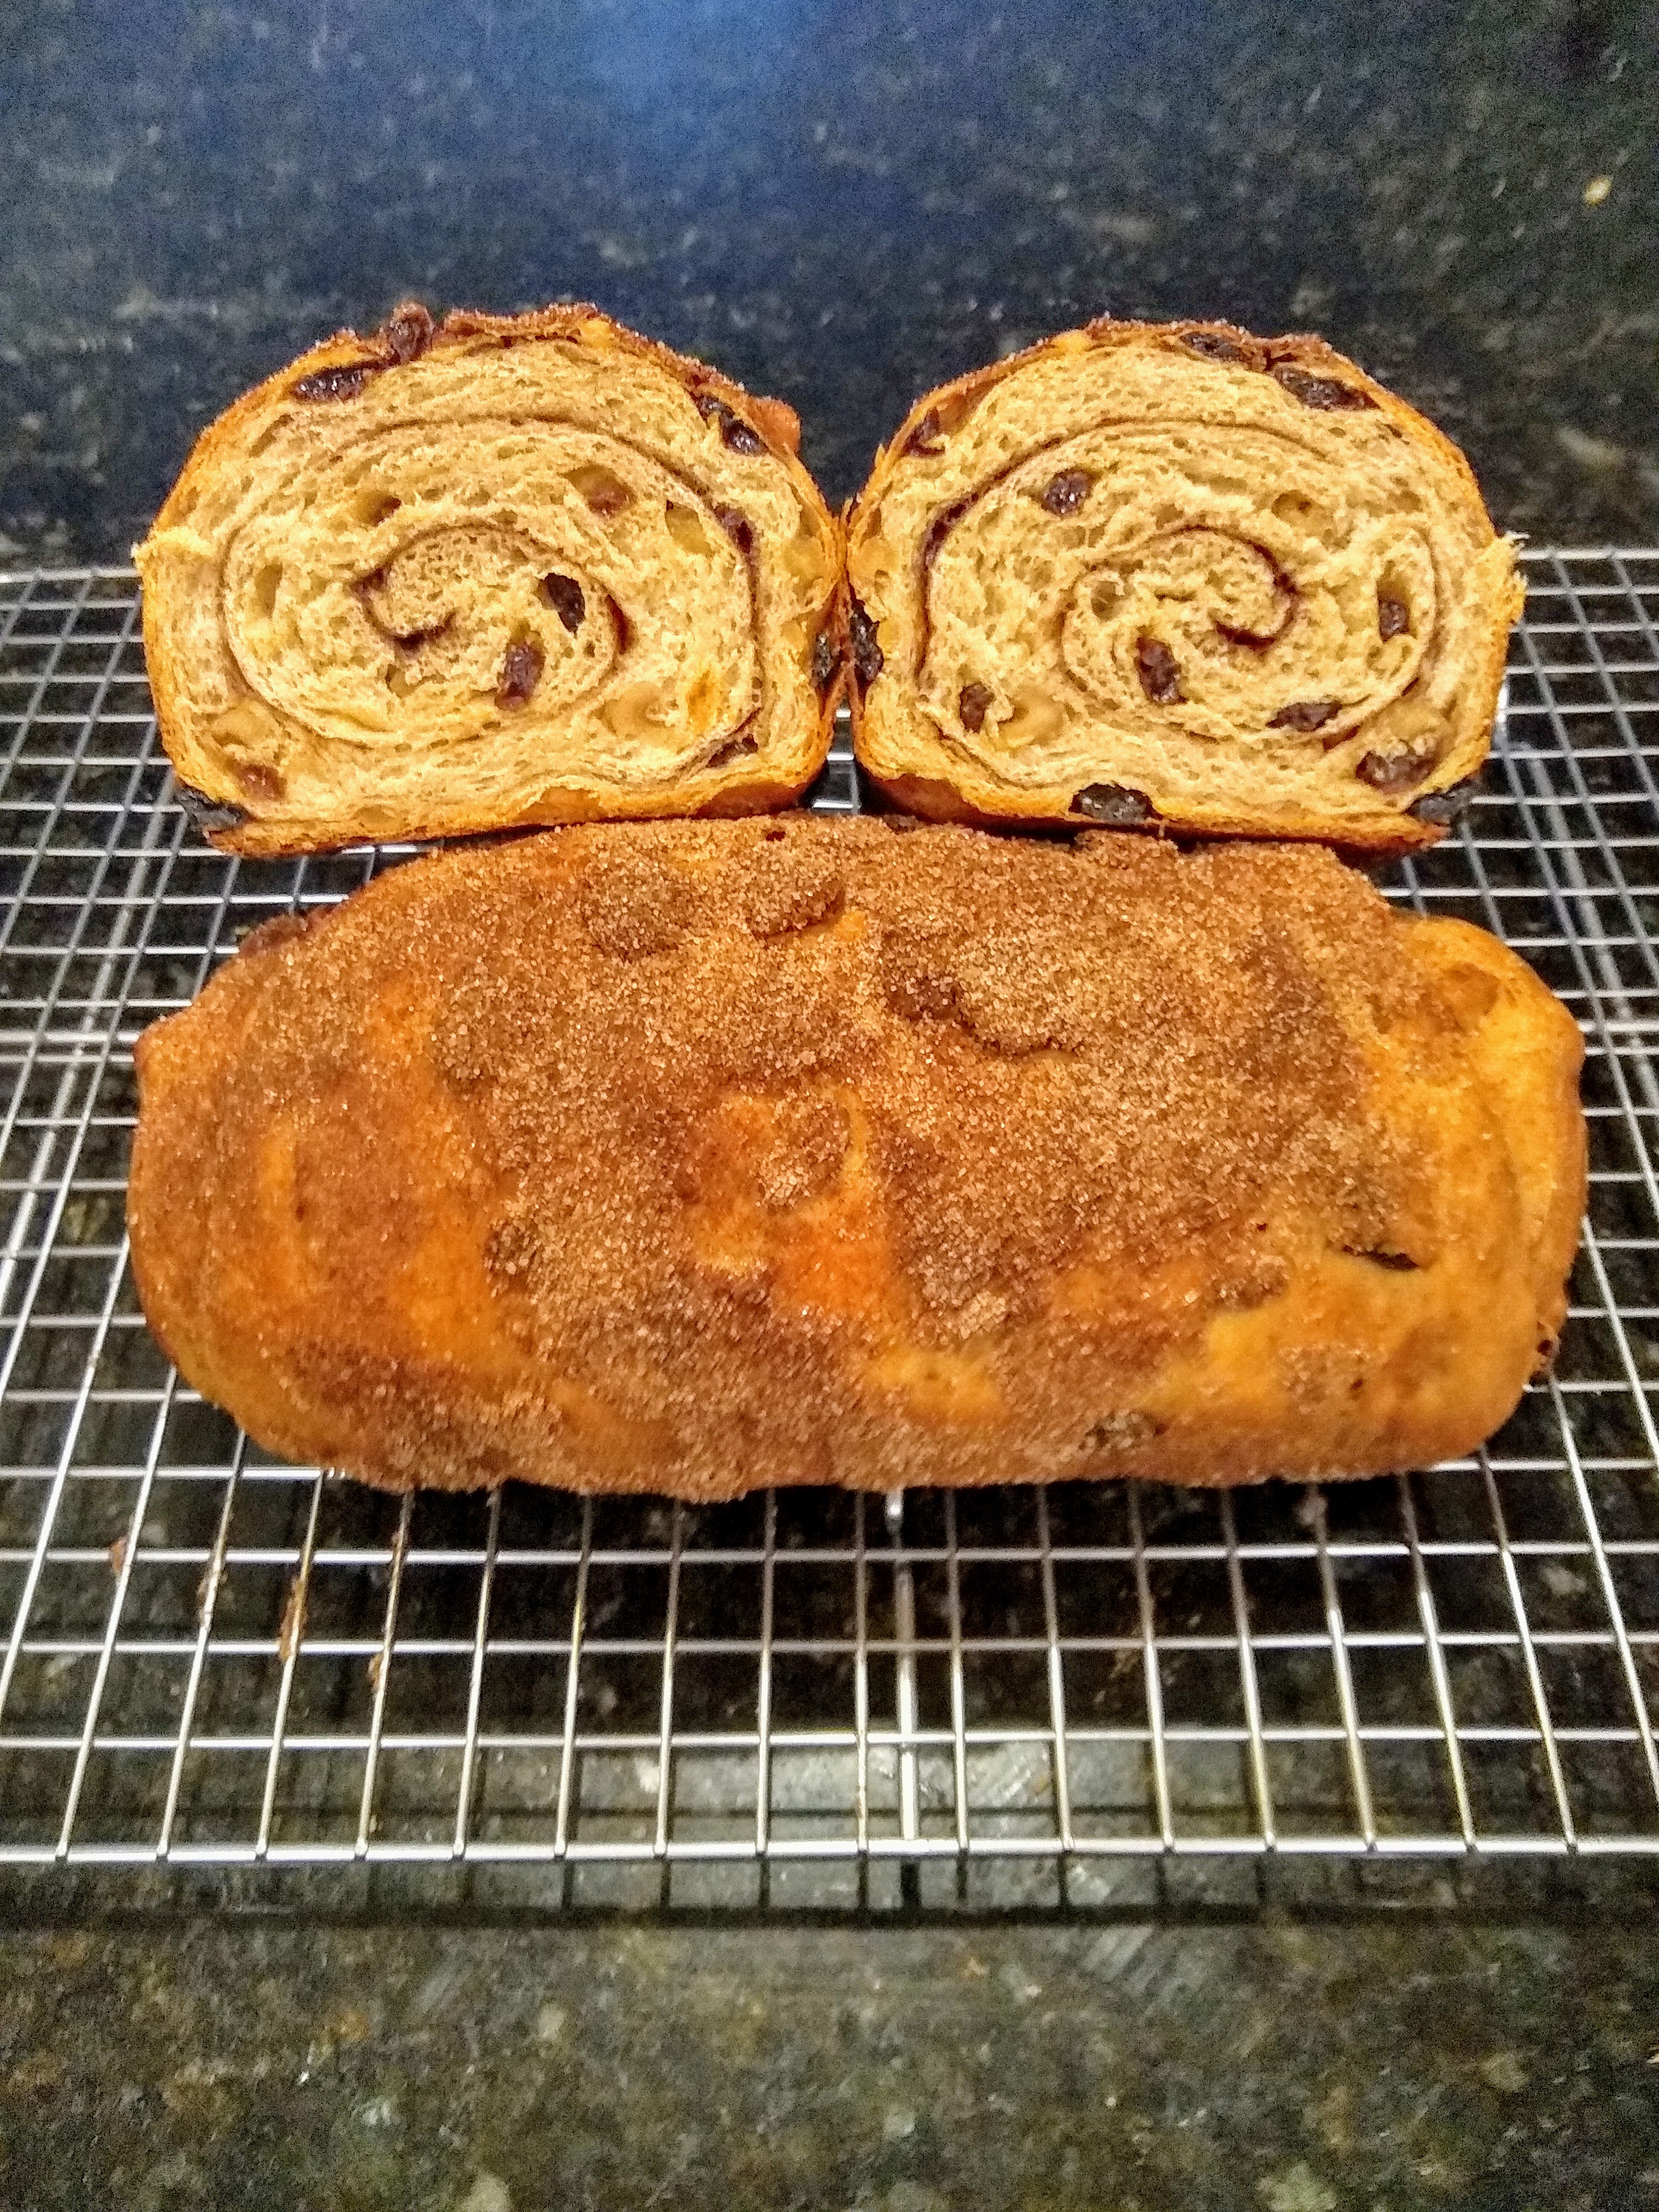 Completed cinnamon bread with swirl